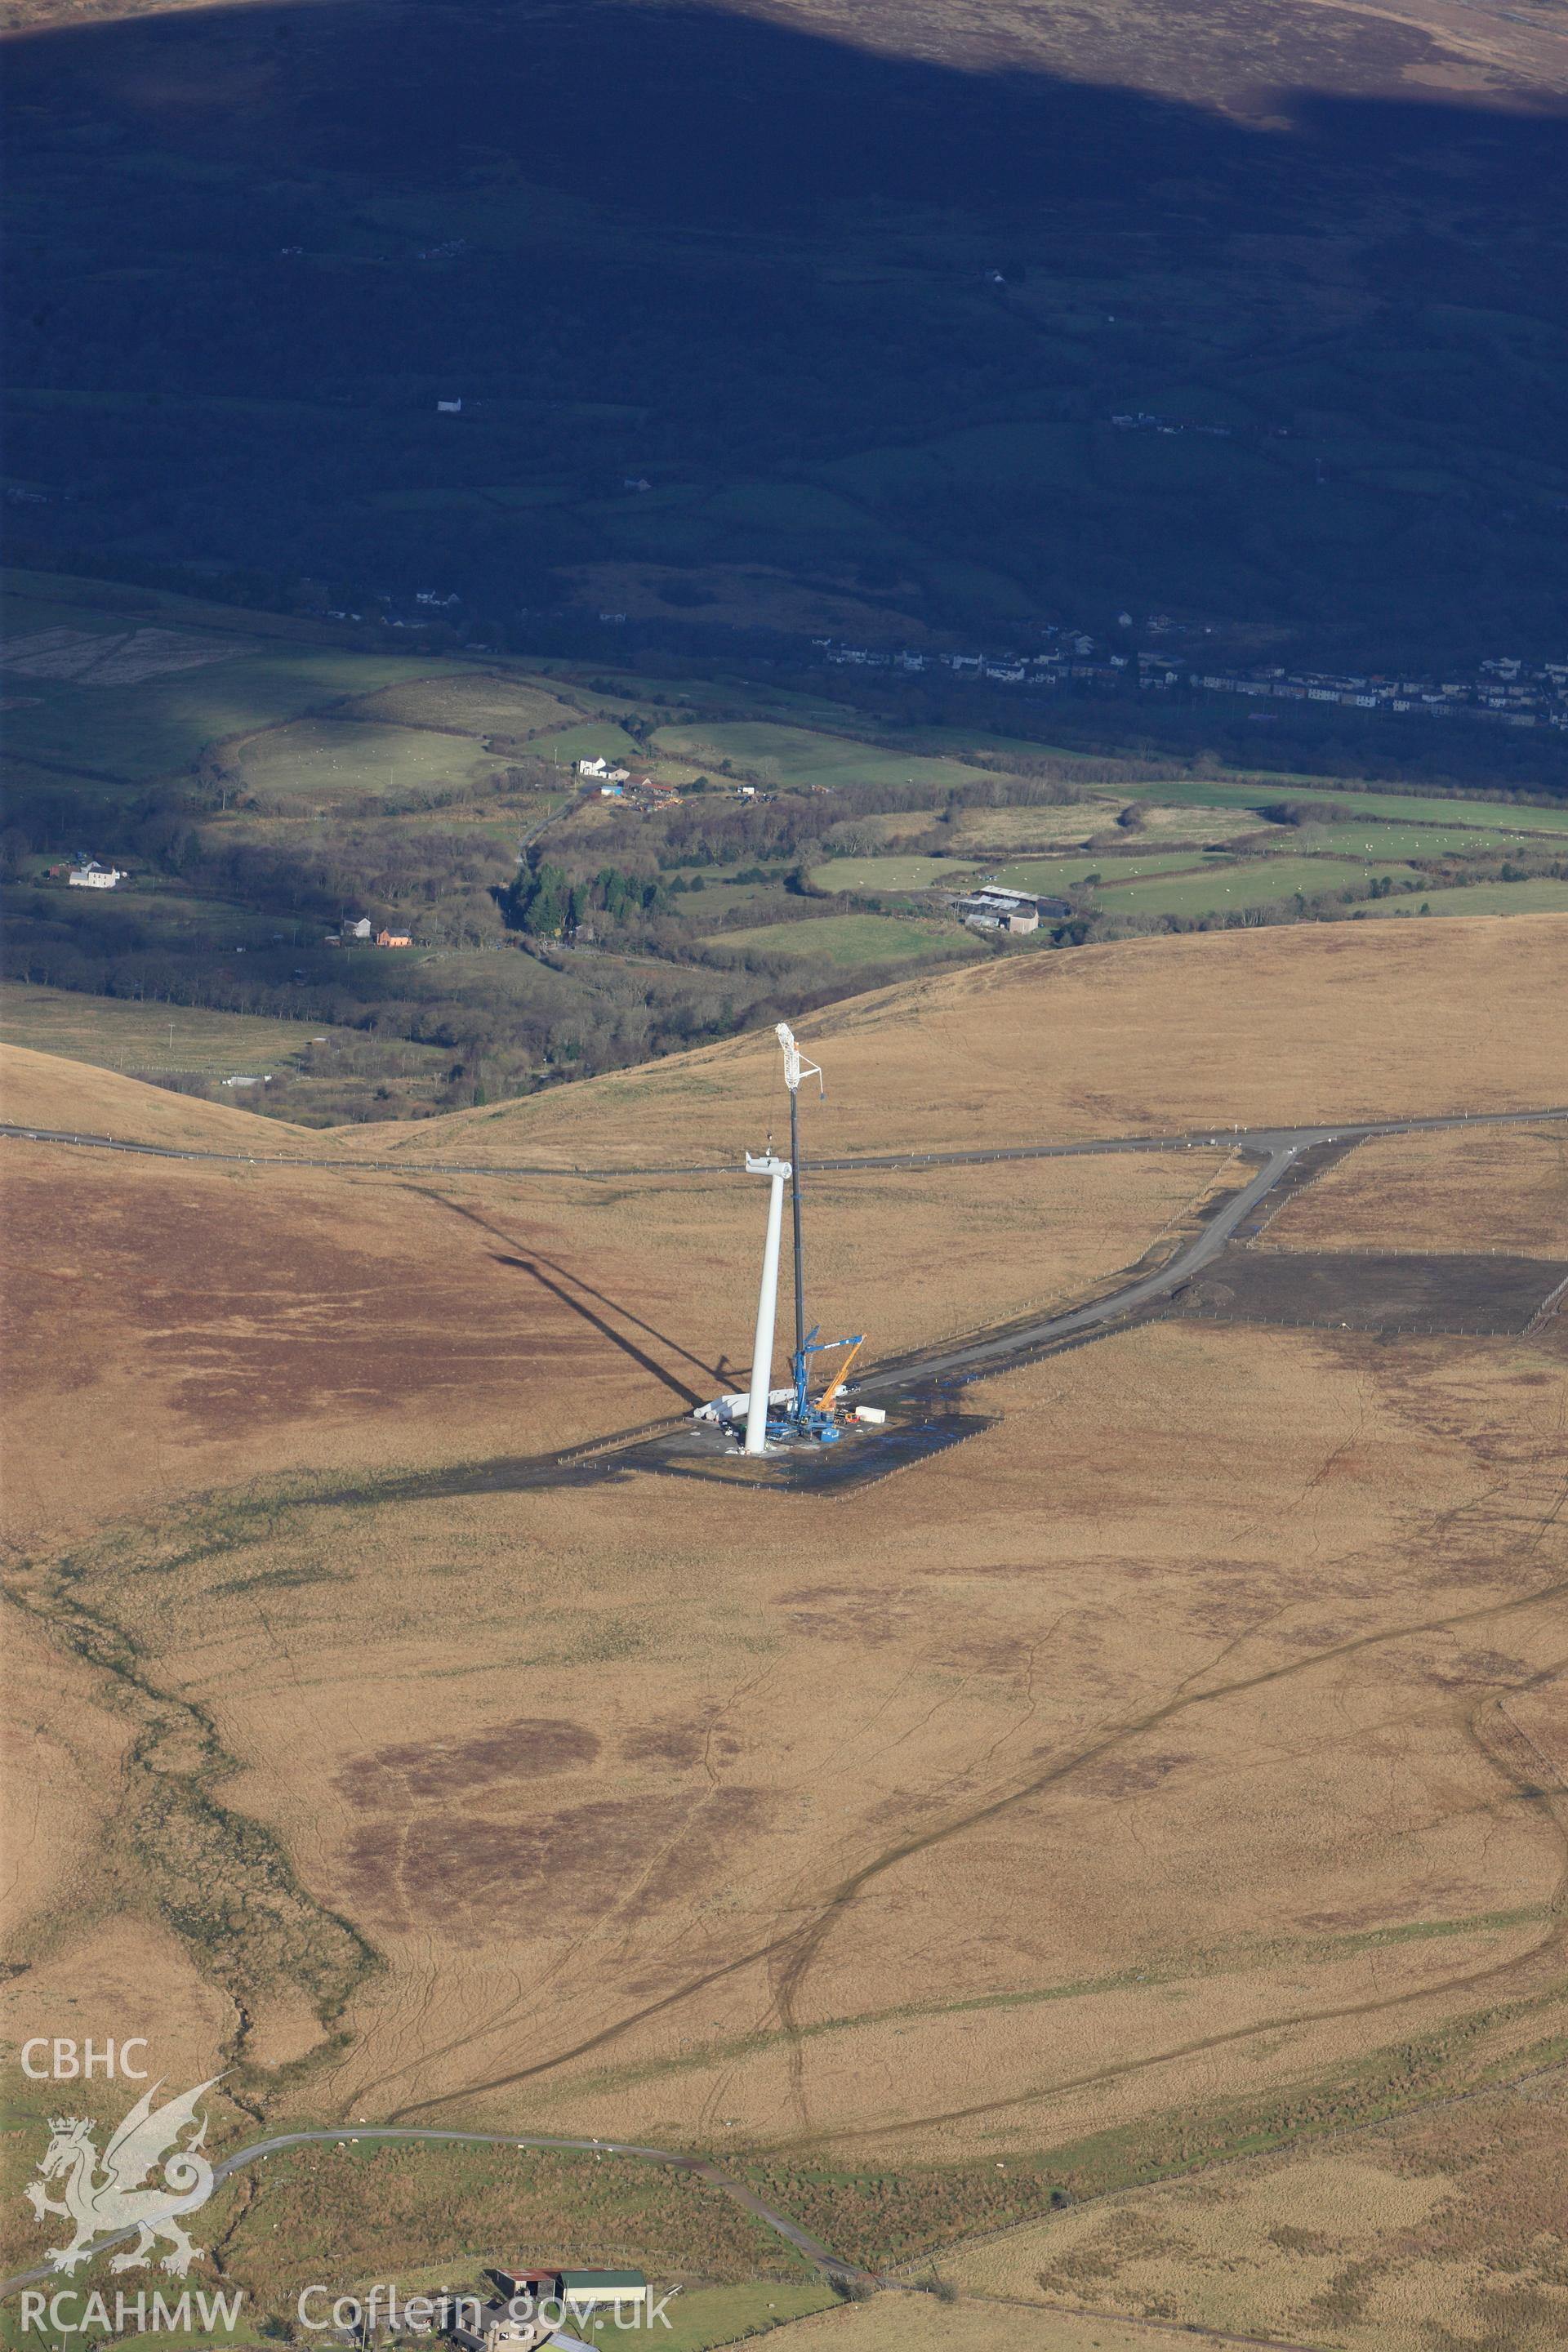 RCAHMW colour oblique photograph of Mynydd y Betws windfarm, view of turbine (at NGR) under installation, from south. Taken by Toby Driver on 28/11/2012.